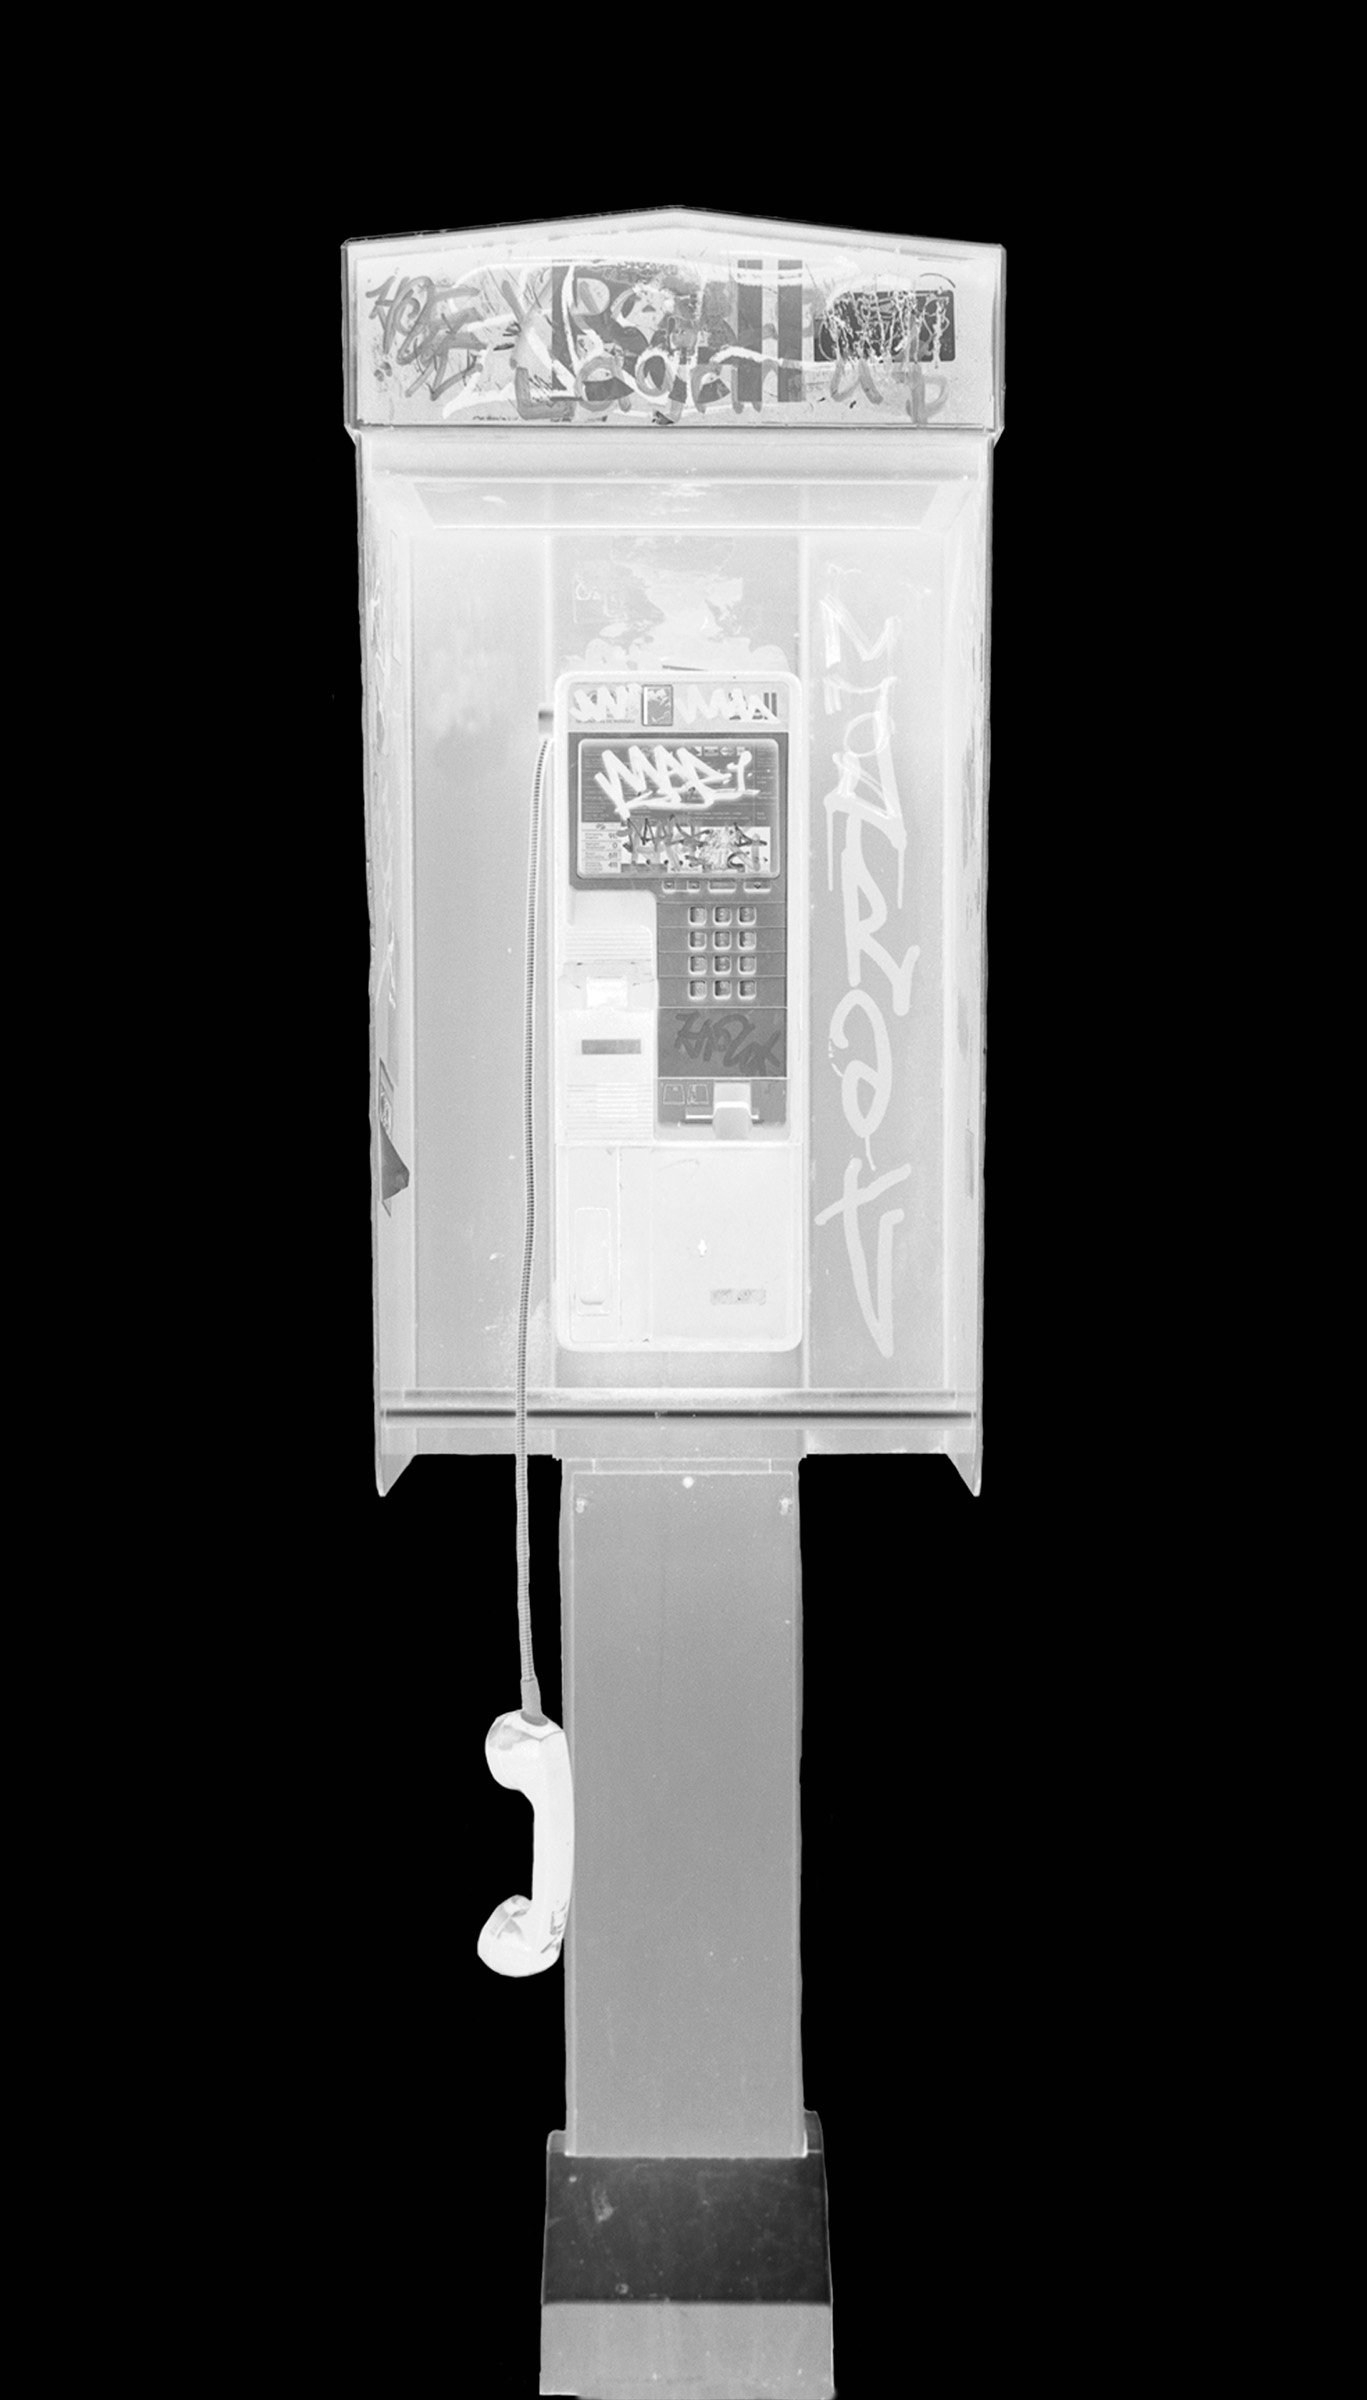 A black and white photo of a pay phone with a thick black border around it. The payphone has graffiti on the top and sides around the phone. The phone is hanging down off its stand by the cord.